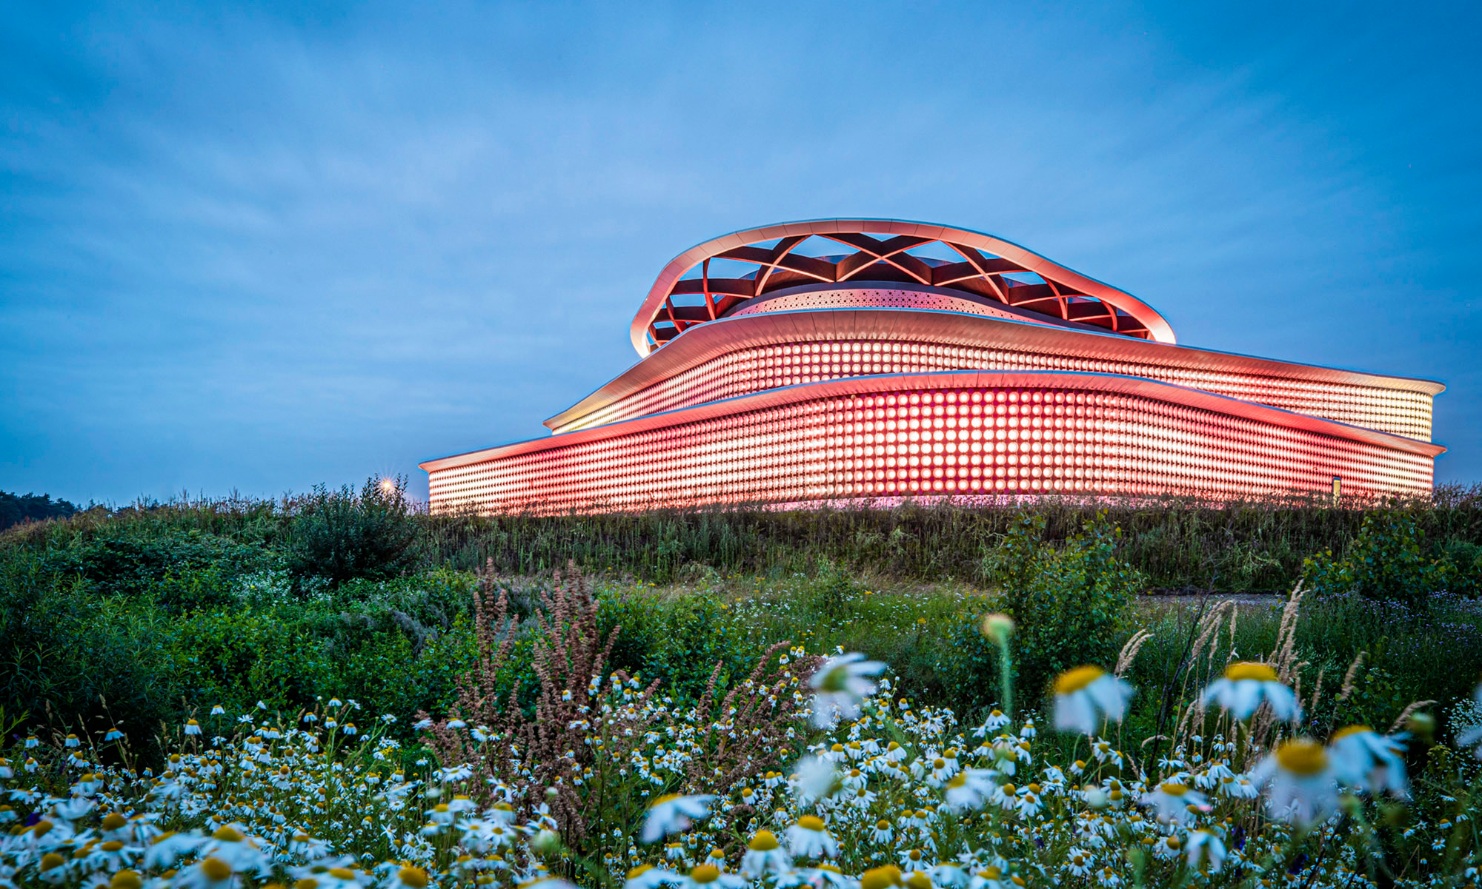 Holland Casino in Venlo in Free Form Timber Construction